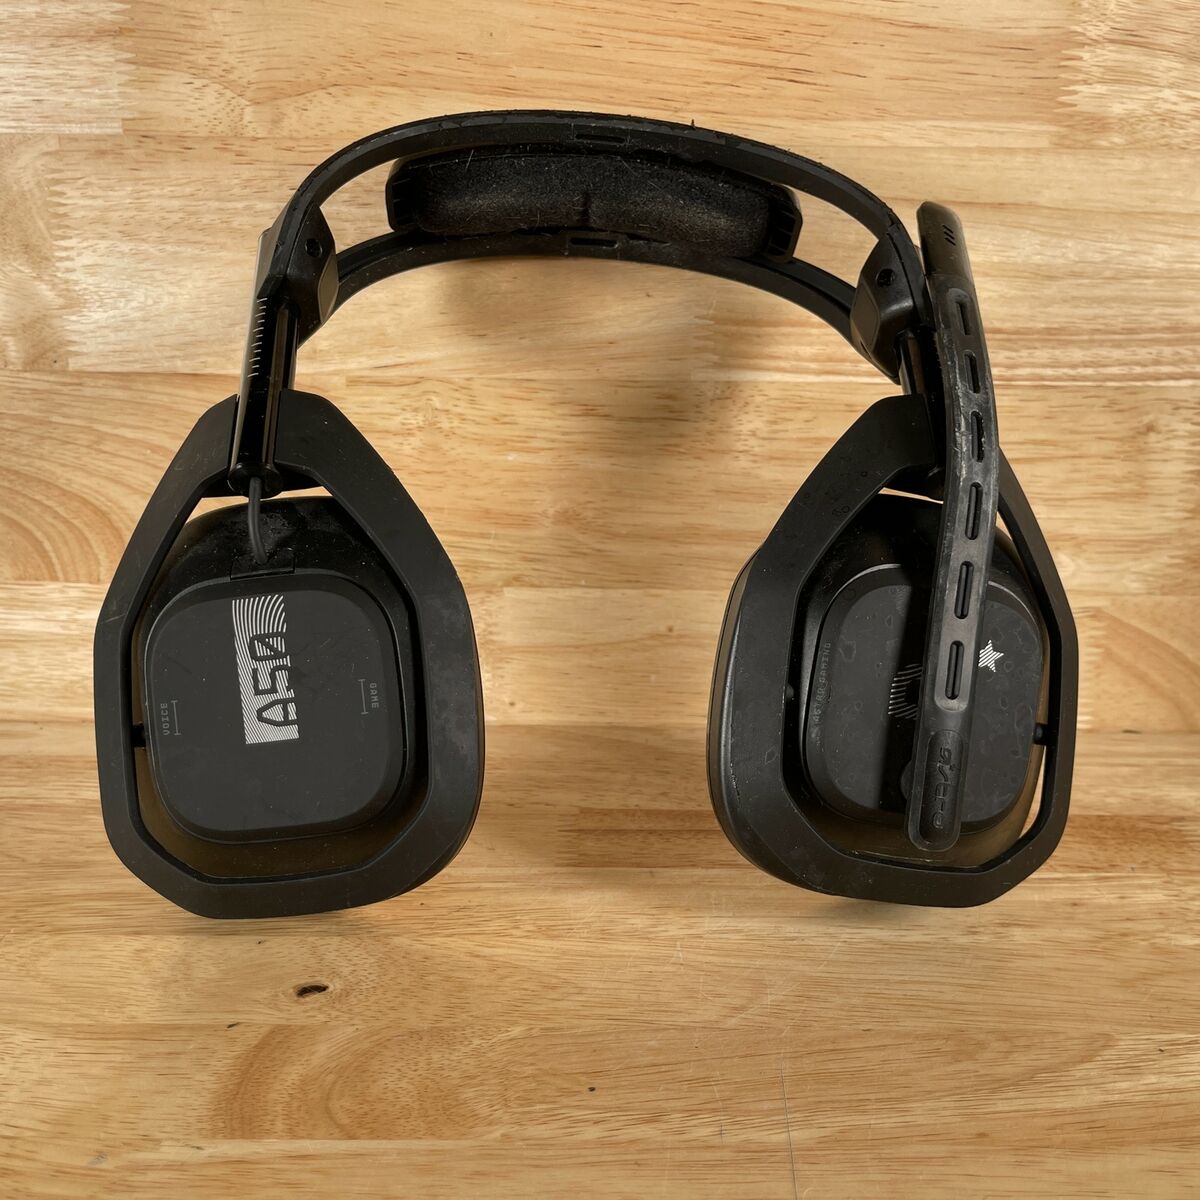 Astro A50 Black Wireless Bluetooth Mic Over-Ear Gaming for PS4 Xbox | eBay